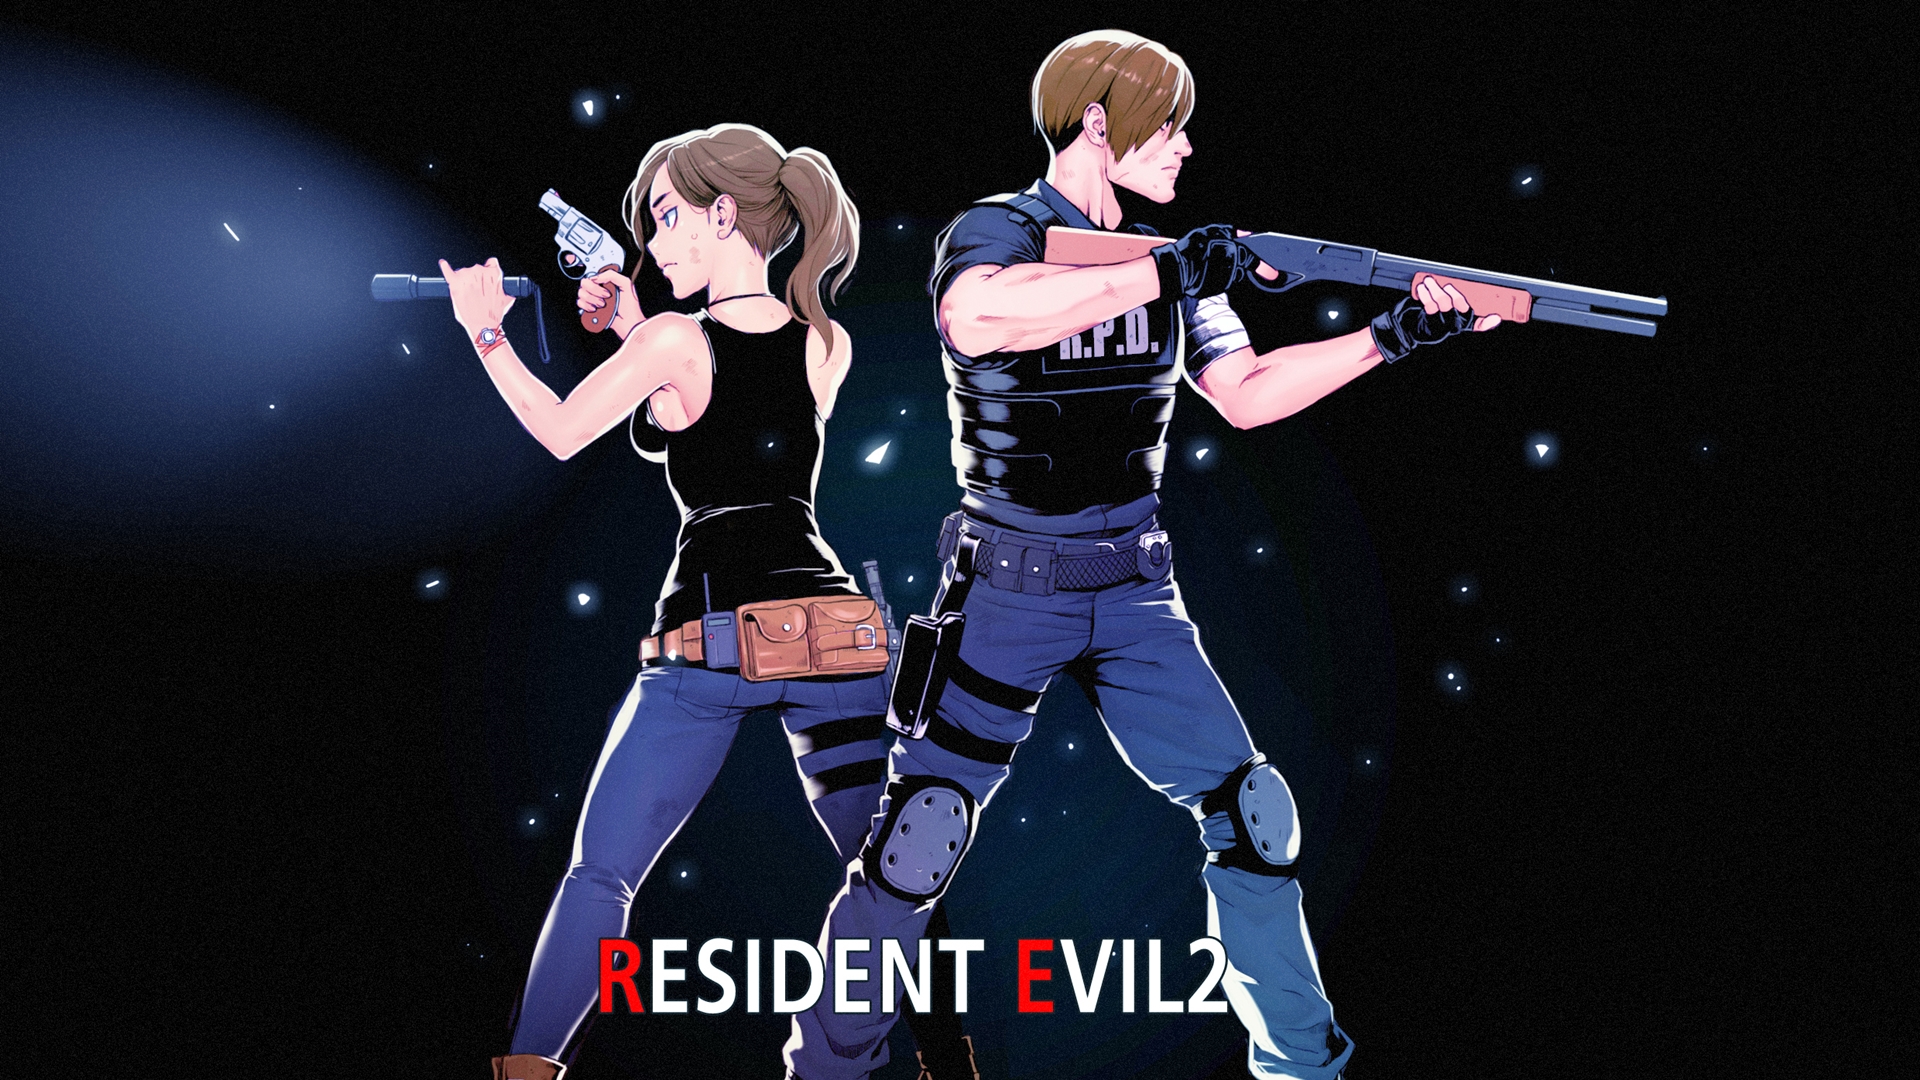 Claire Redfield Leon S Kennedy Resident Evil 2 2019 1920x1080